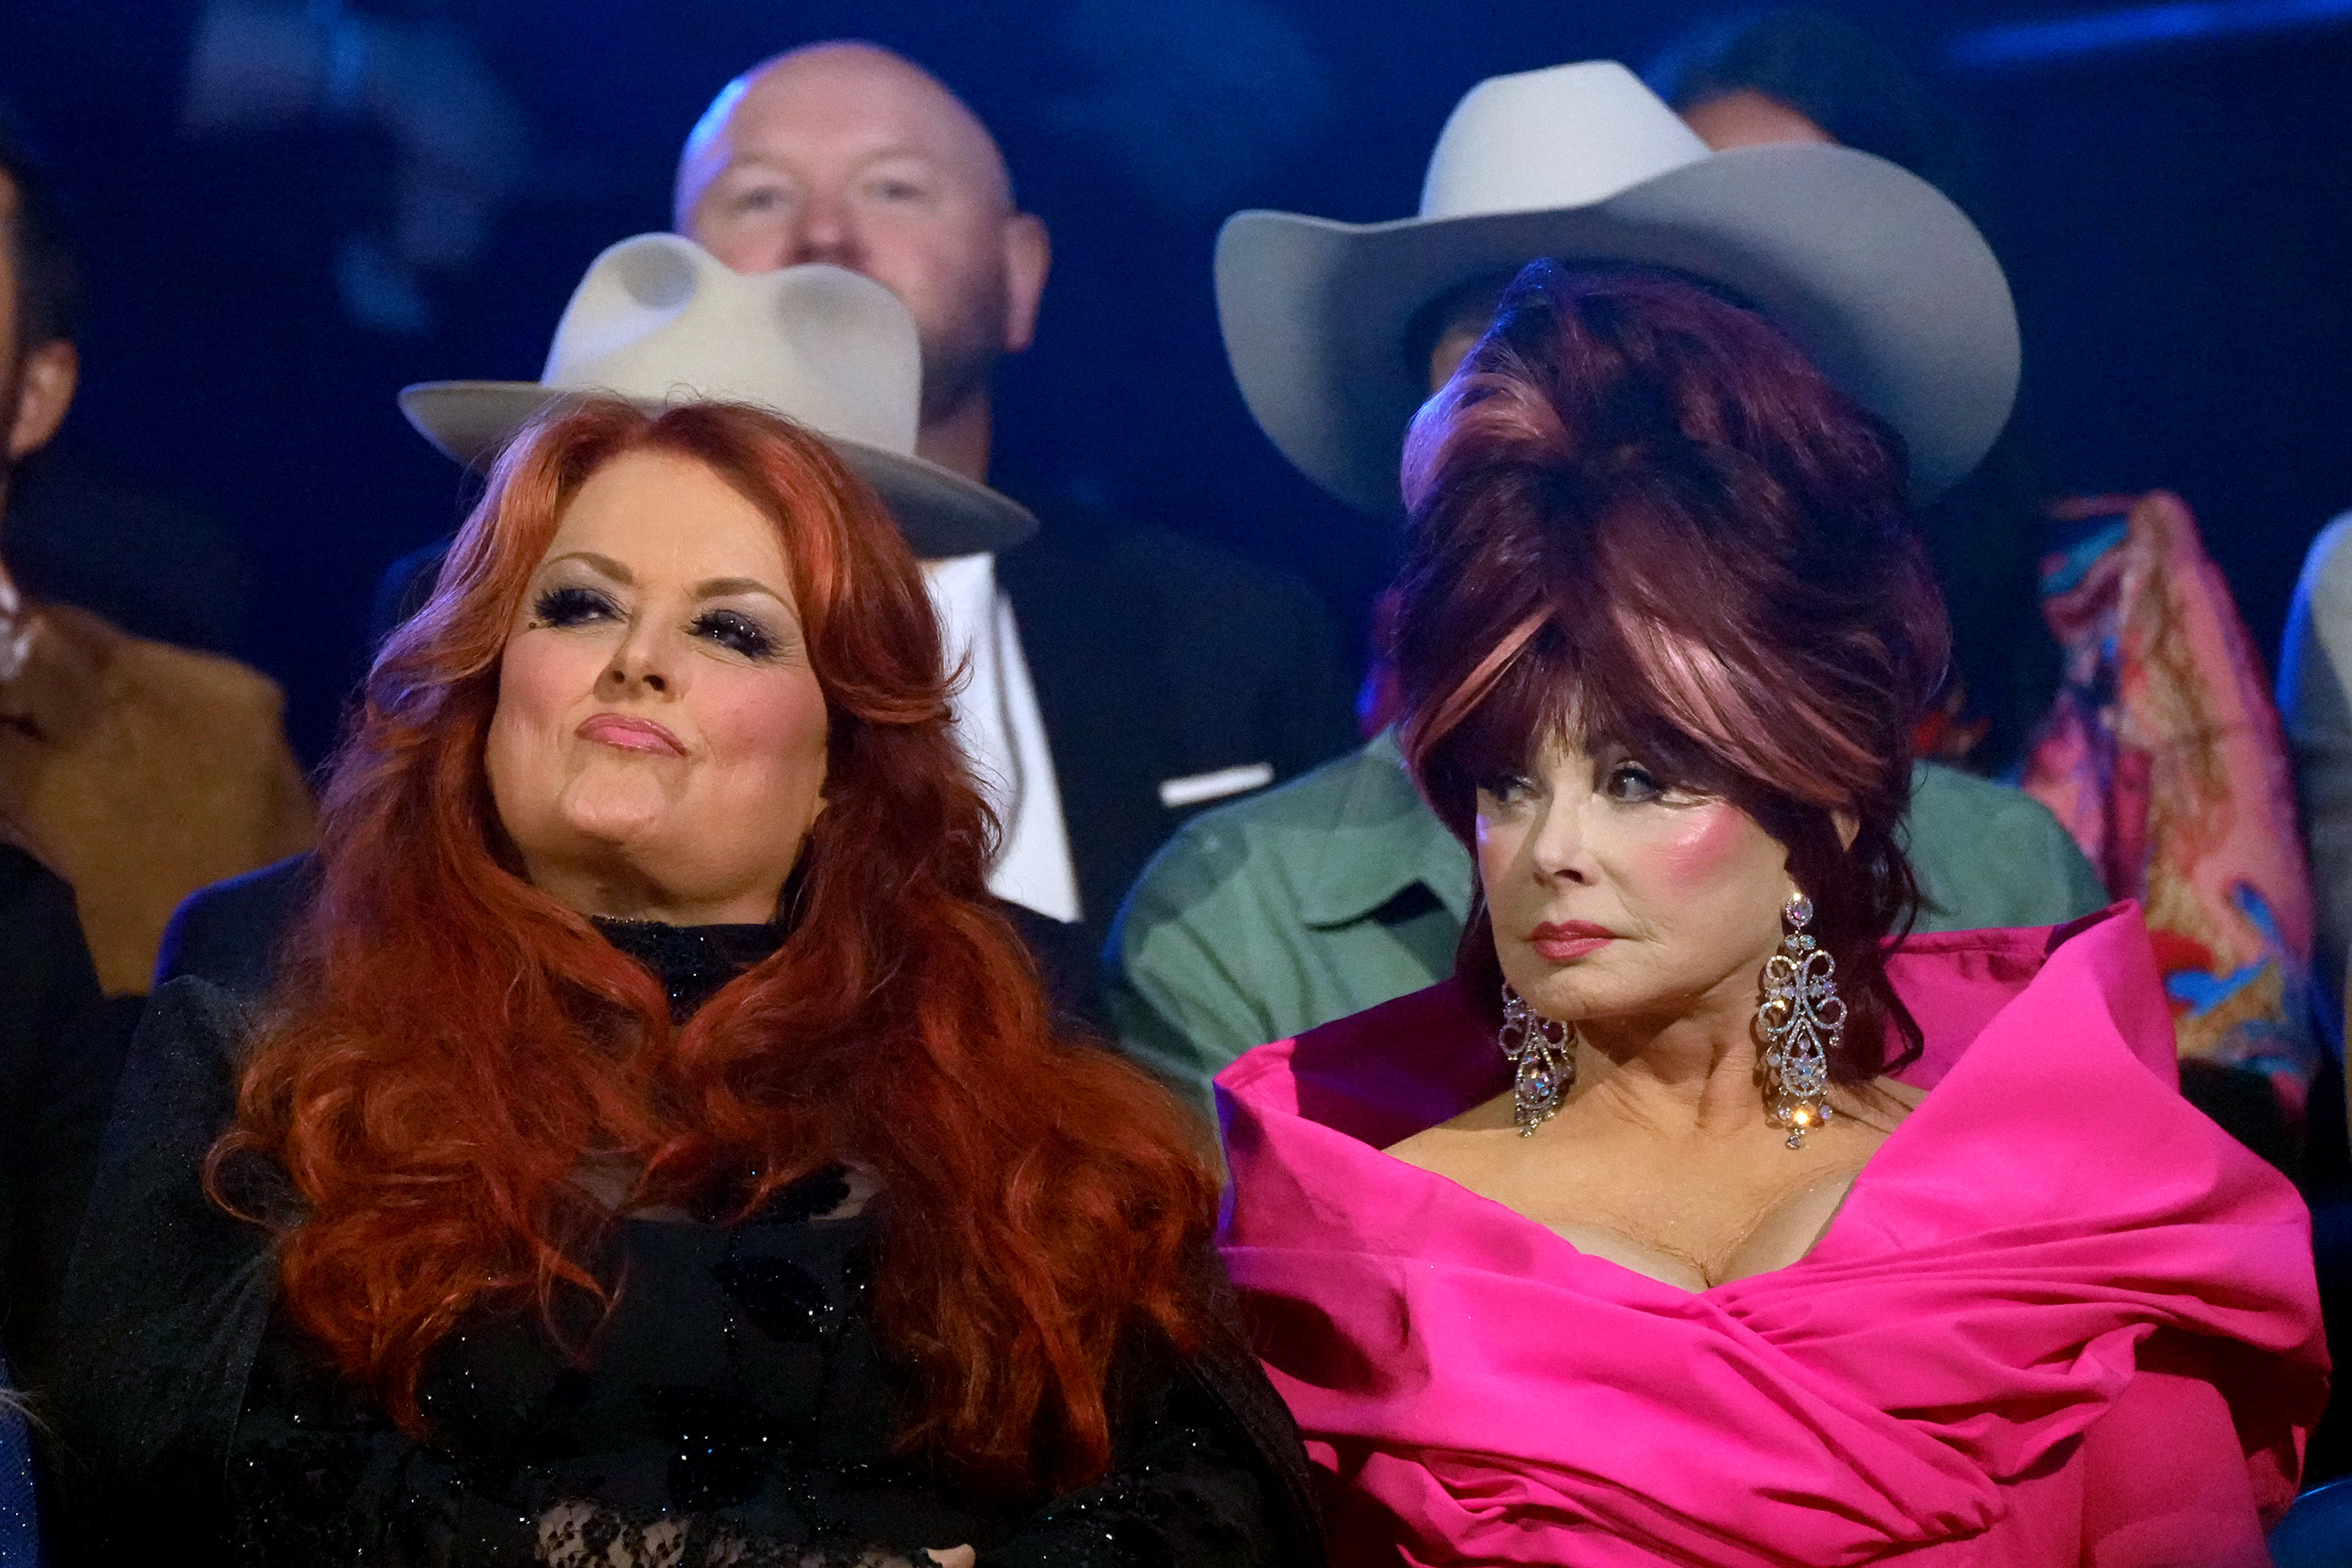 Wynonna and Naomi Judd at the 2022 CMT Music Awards | Source: Getty Images